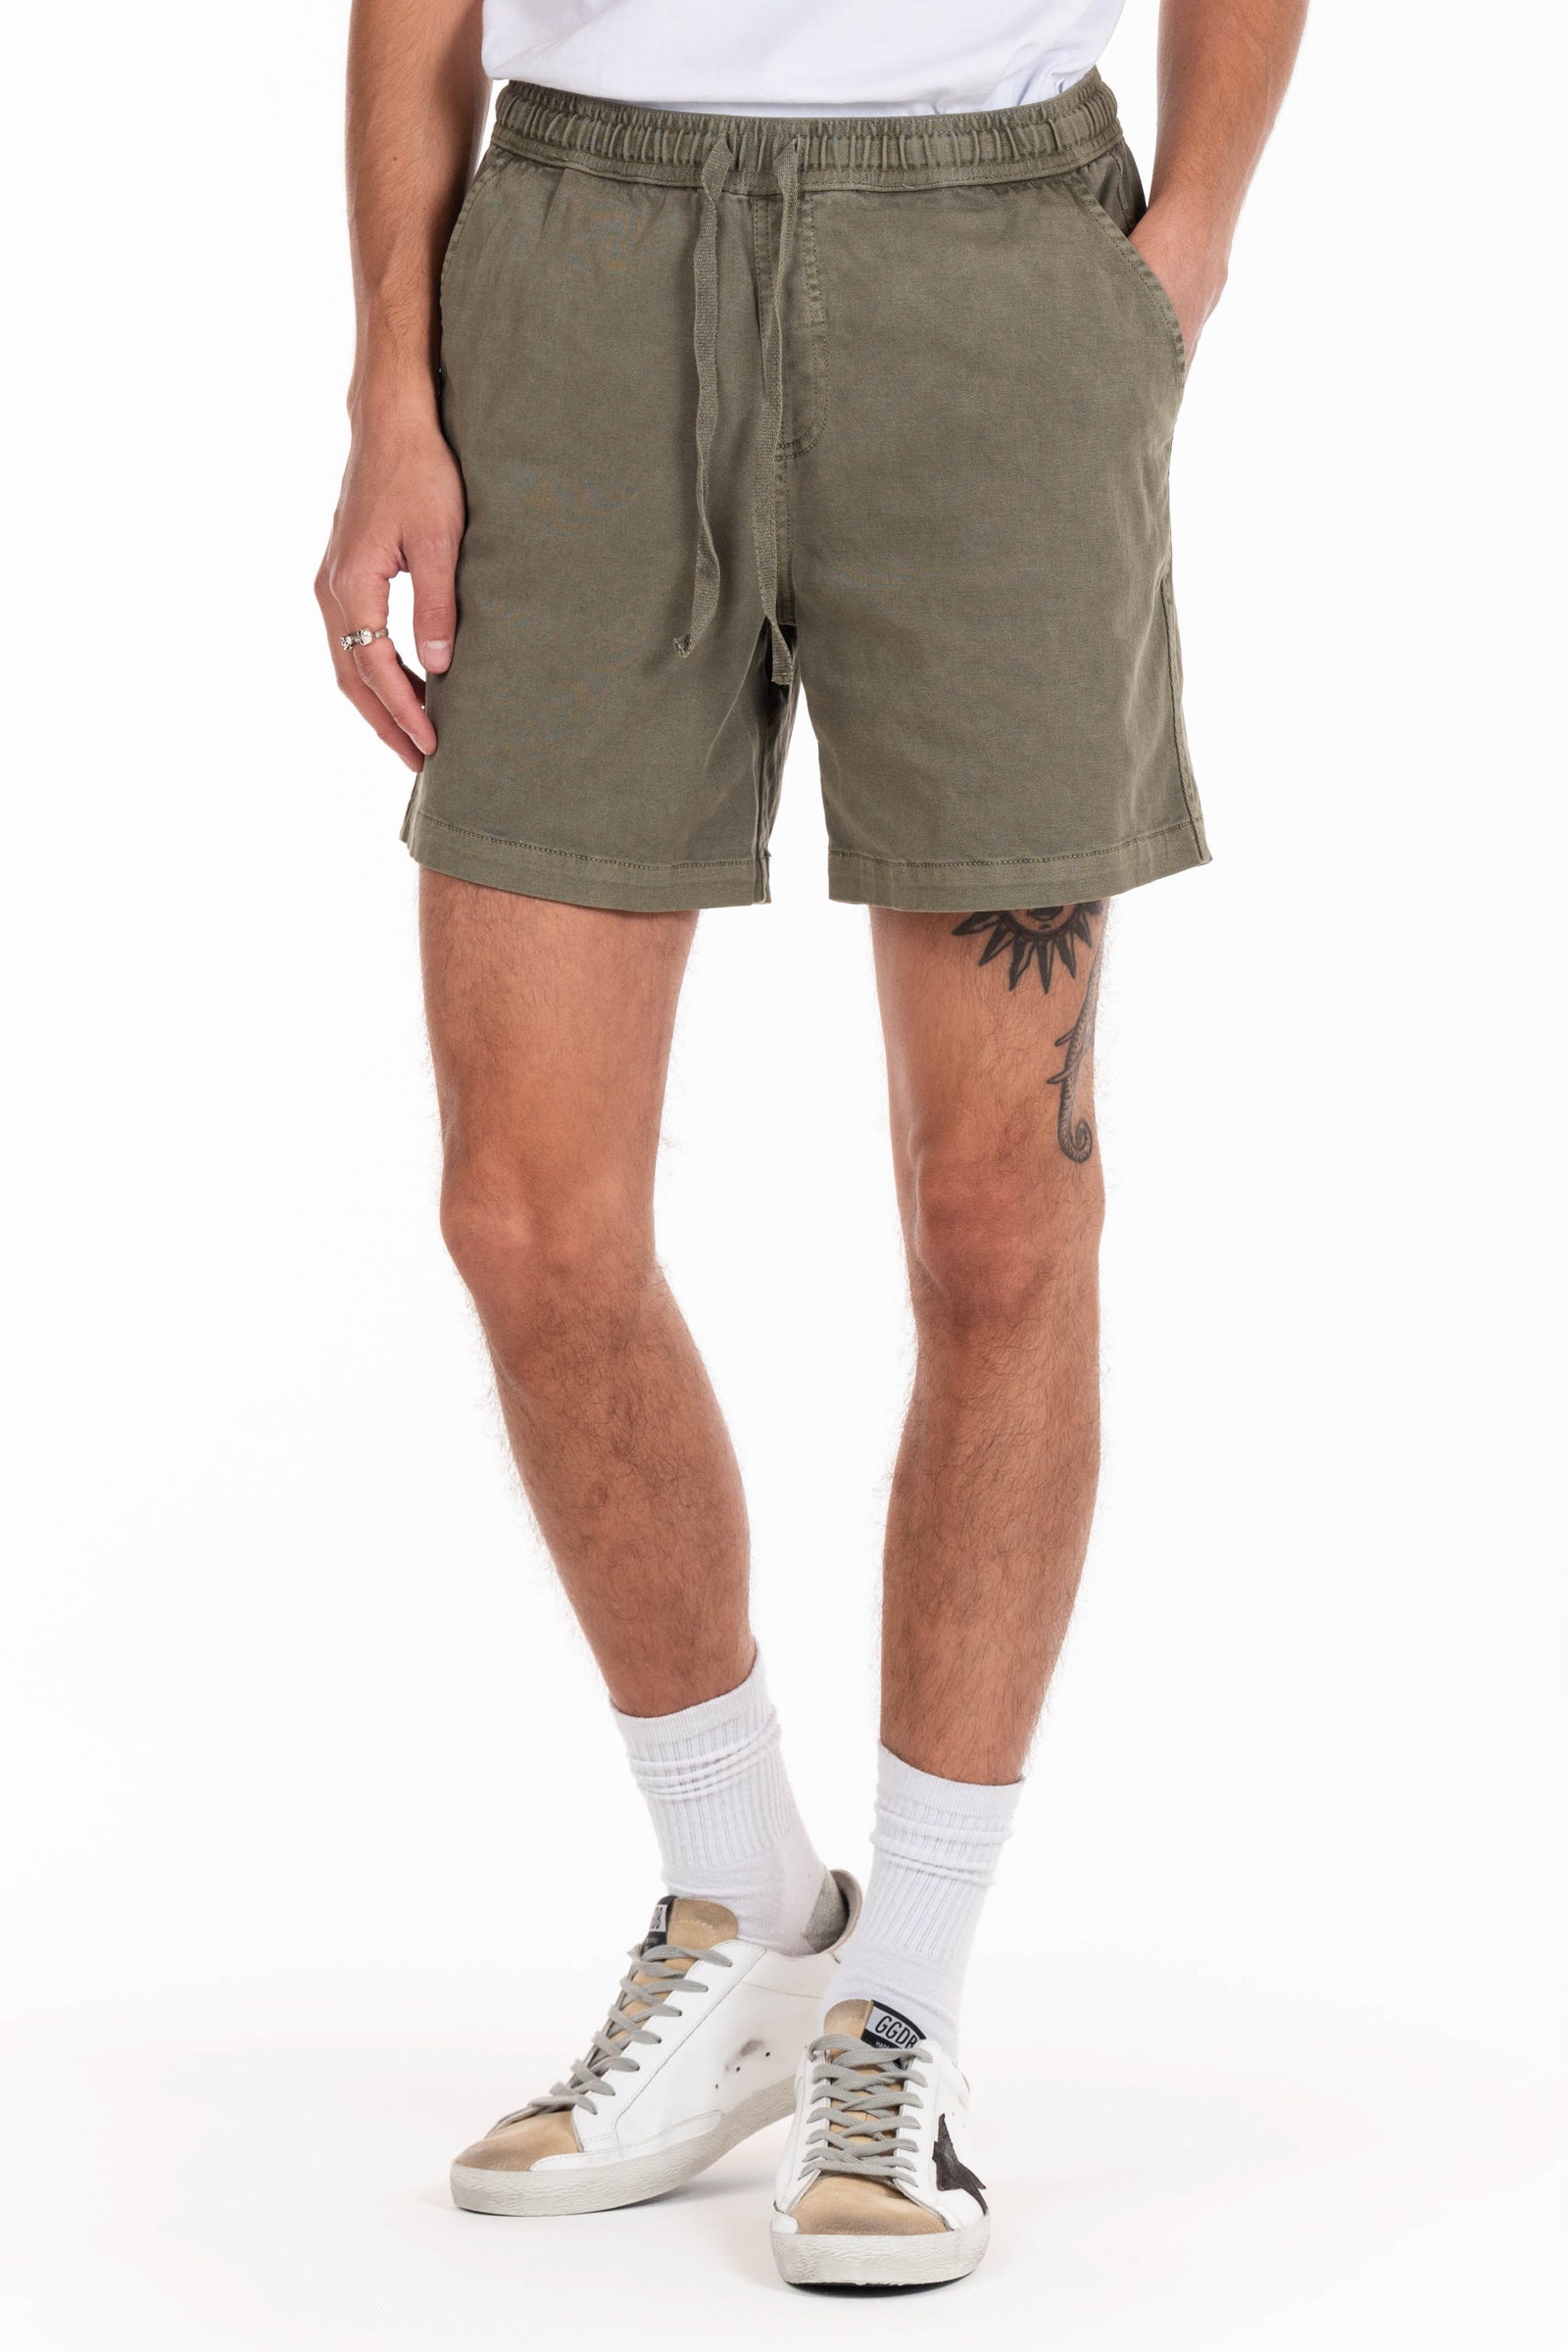 Original Paperbacks San Diego Volley Short in Olive on Model Cropped Styled View